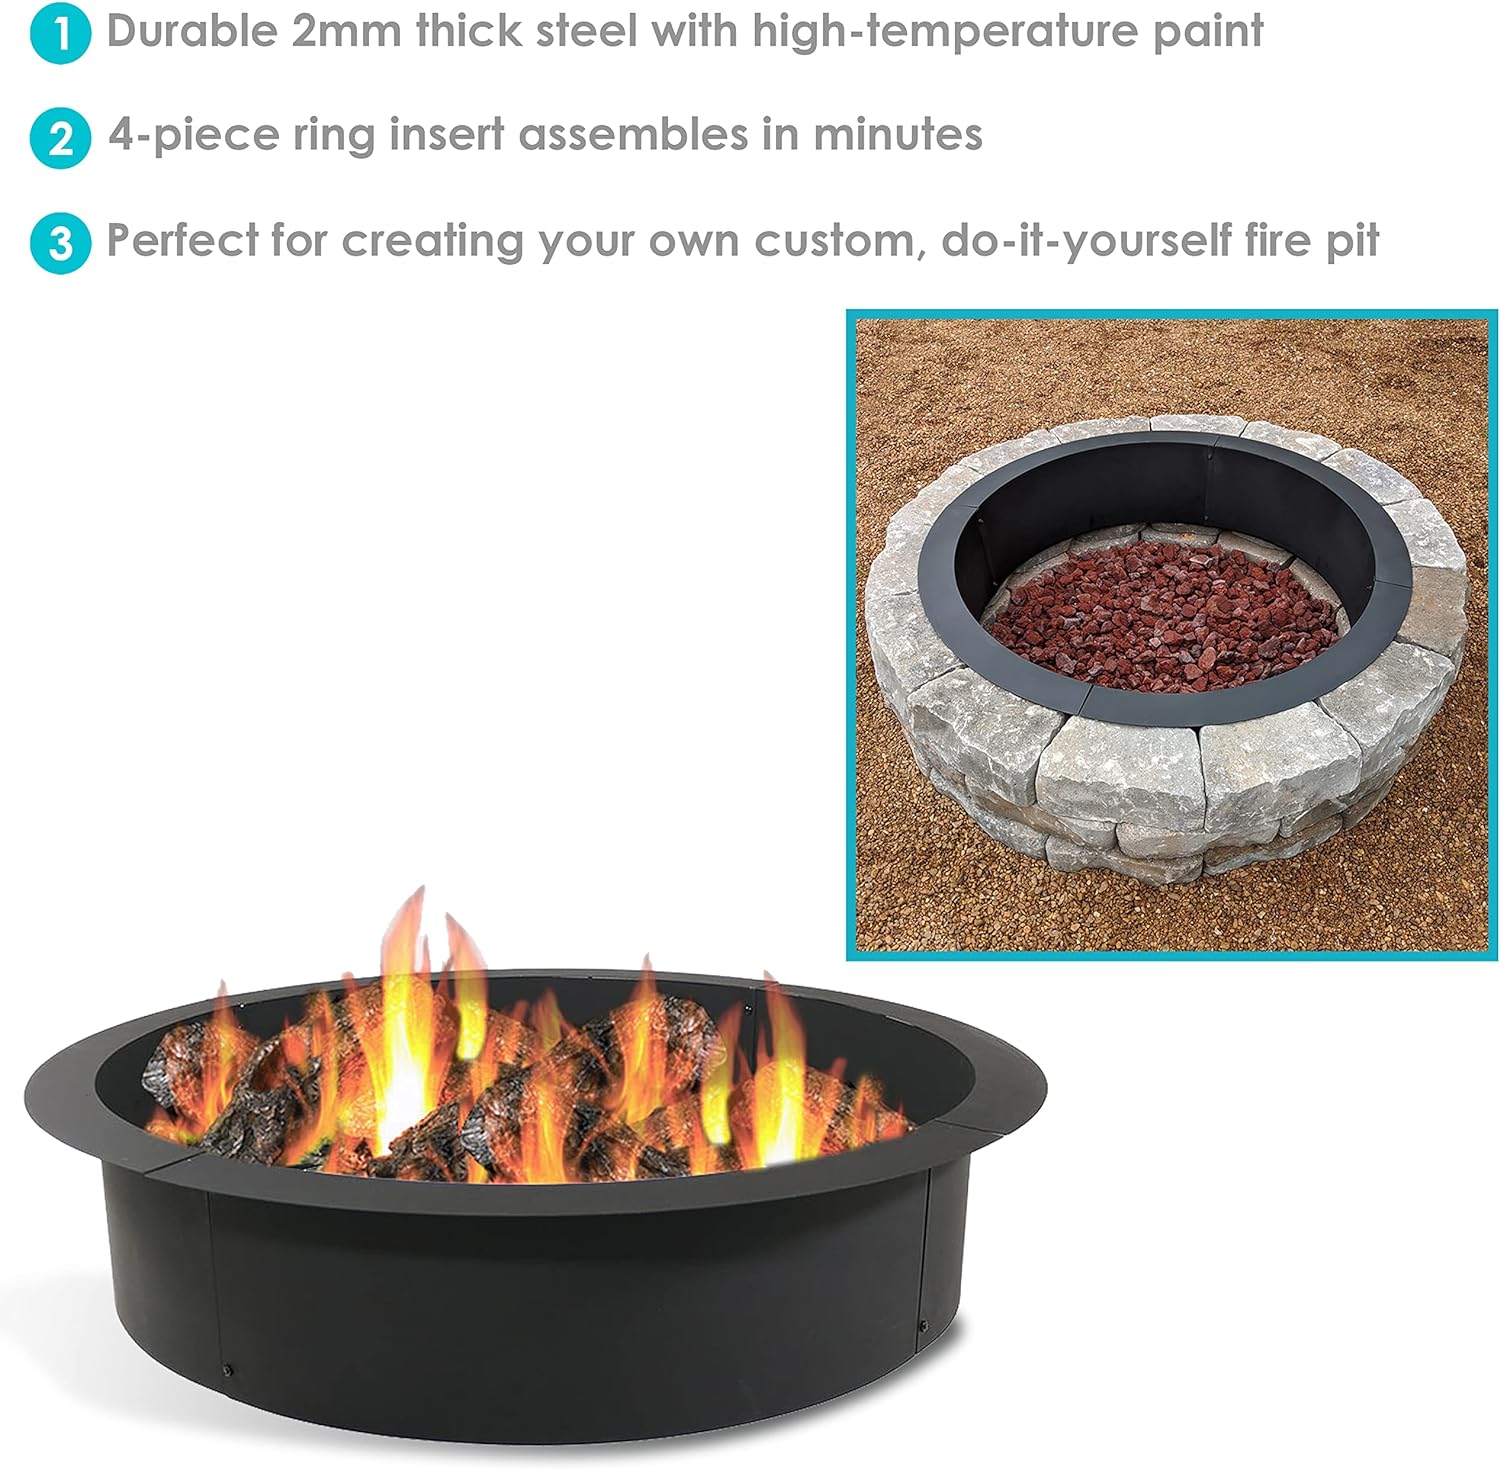 Sunnydaze Fire Pit Ring Insert Review